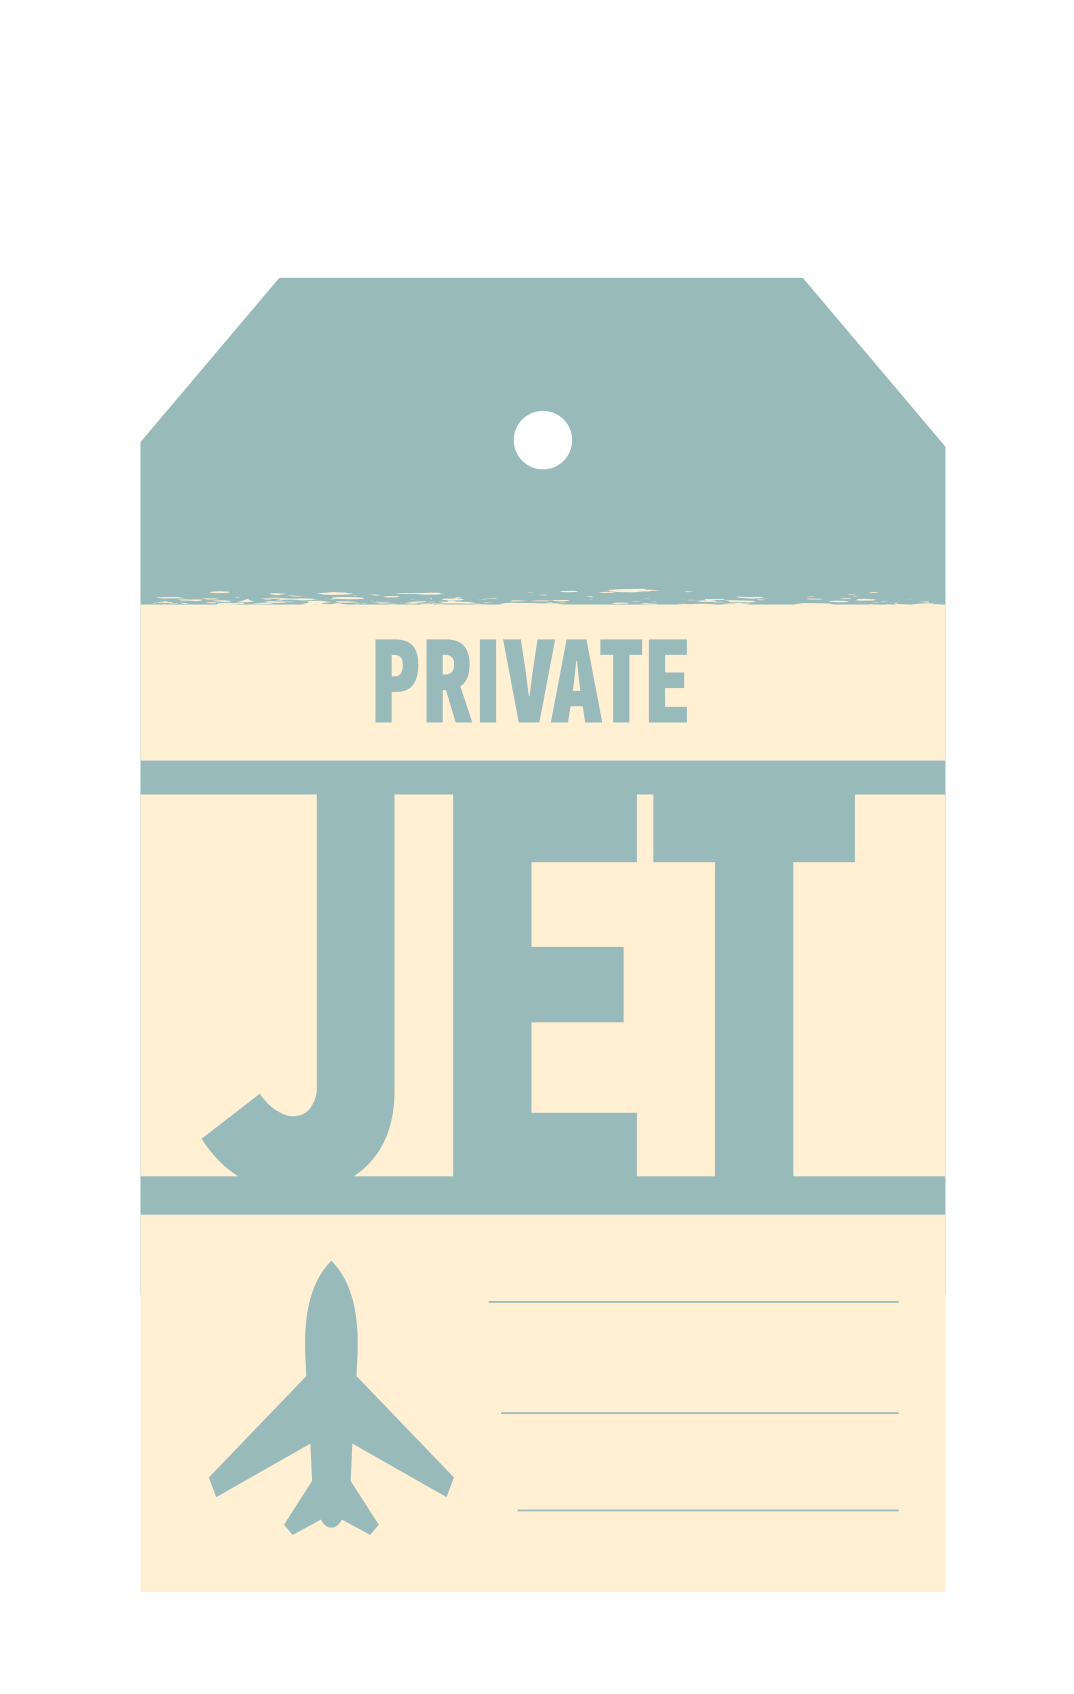 private-jets